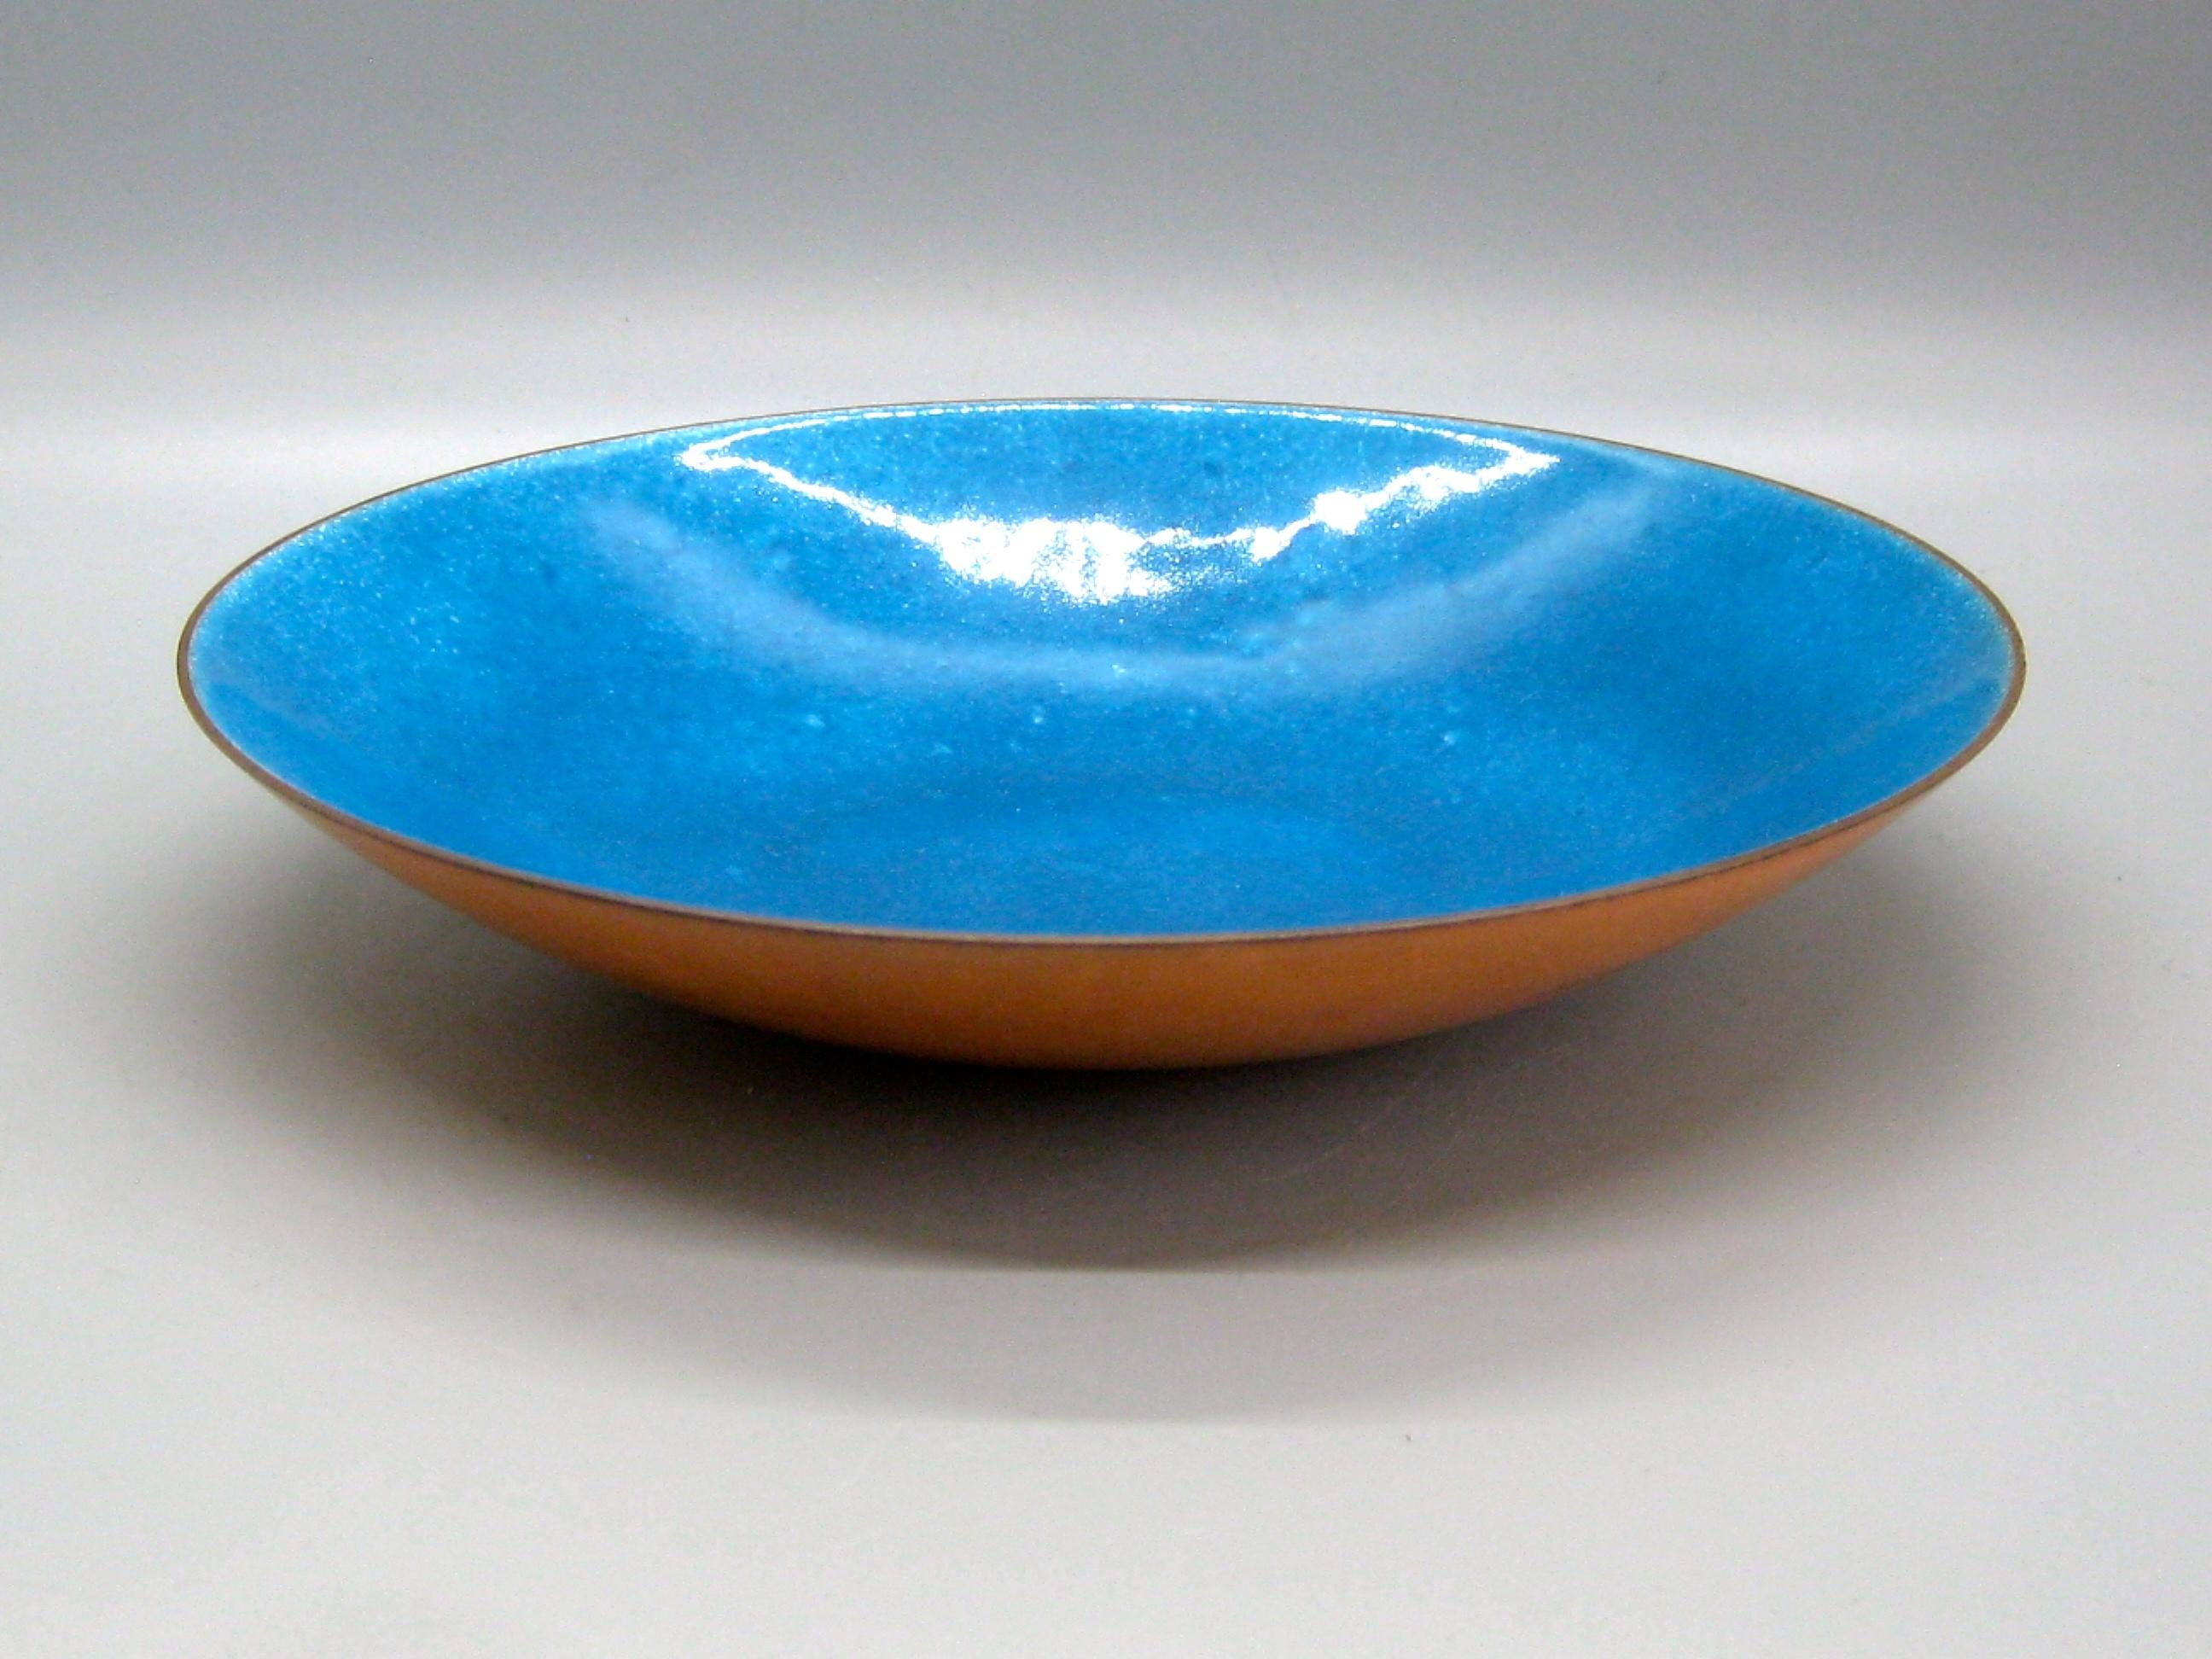 1960s Leon Statham Modernist Turquoise Blue Enamel on Copper Bowl In Excellent Condition For Sale In San Diego, CA